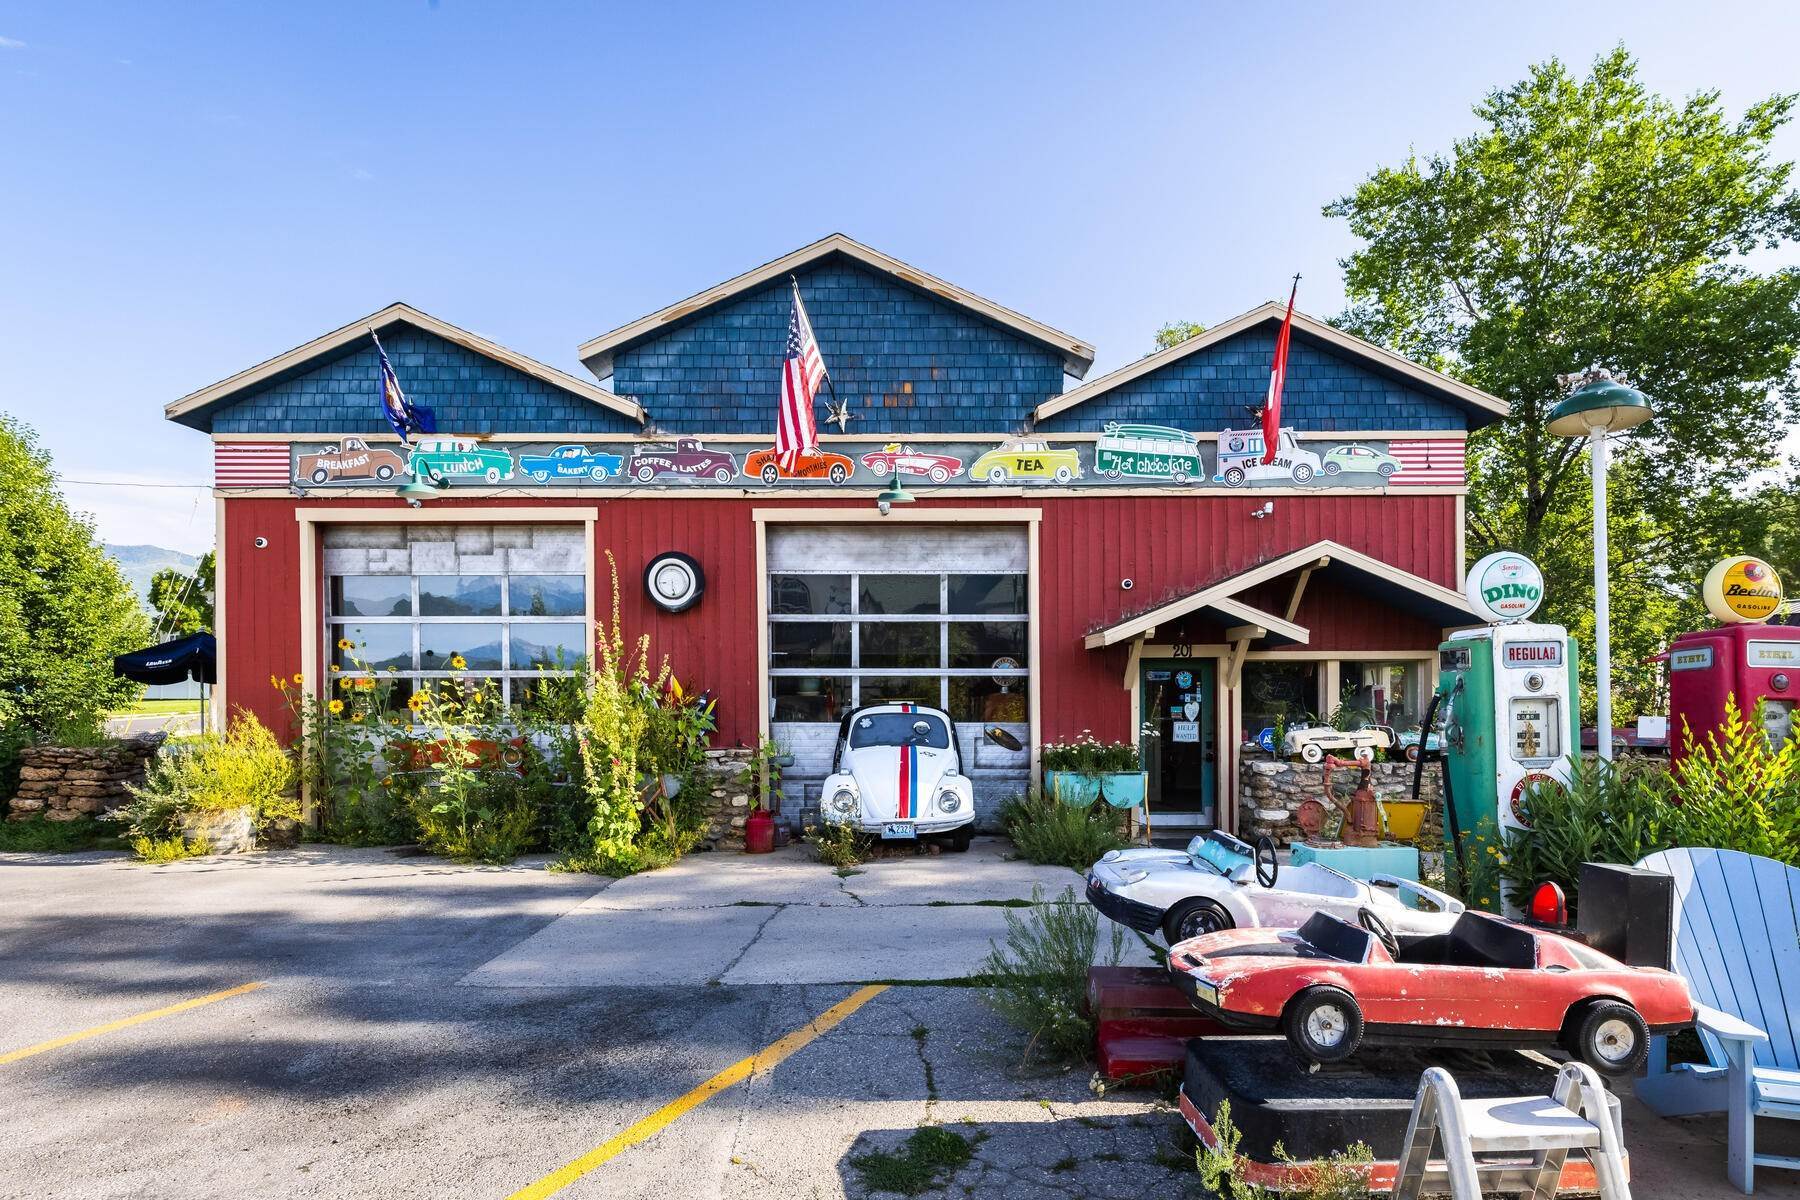 Property for Sale at Iconic Mountain Village Coffee Shop and Home on Prime Main Street Corner Lot 20 203 E Main Street Midway, Utah 84049 United States